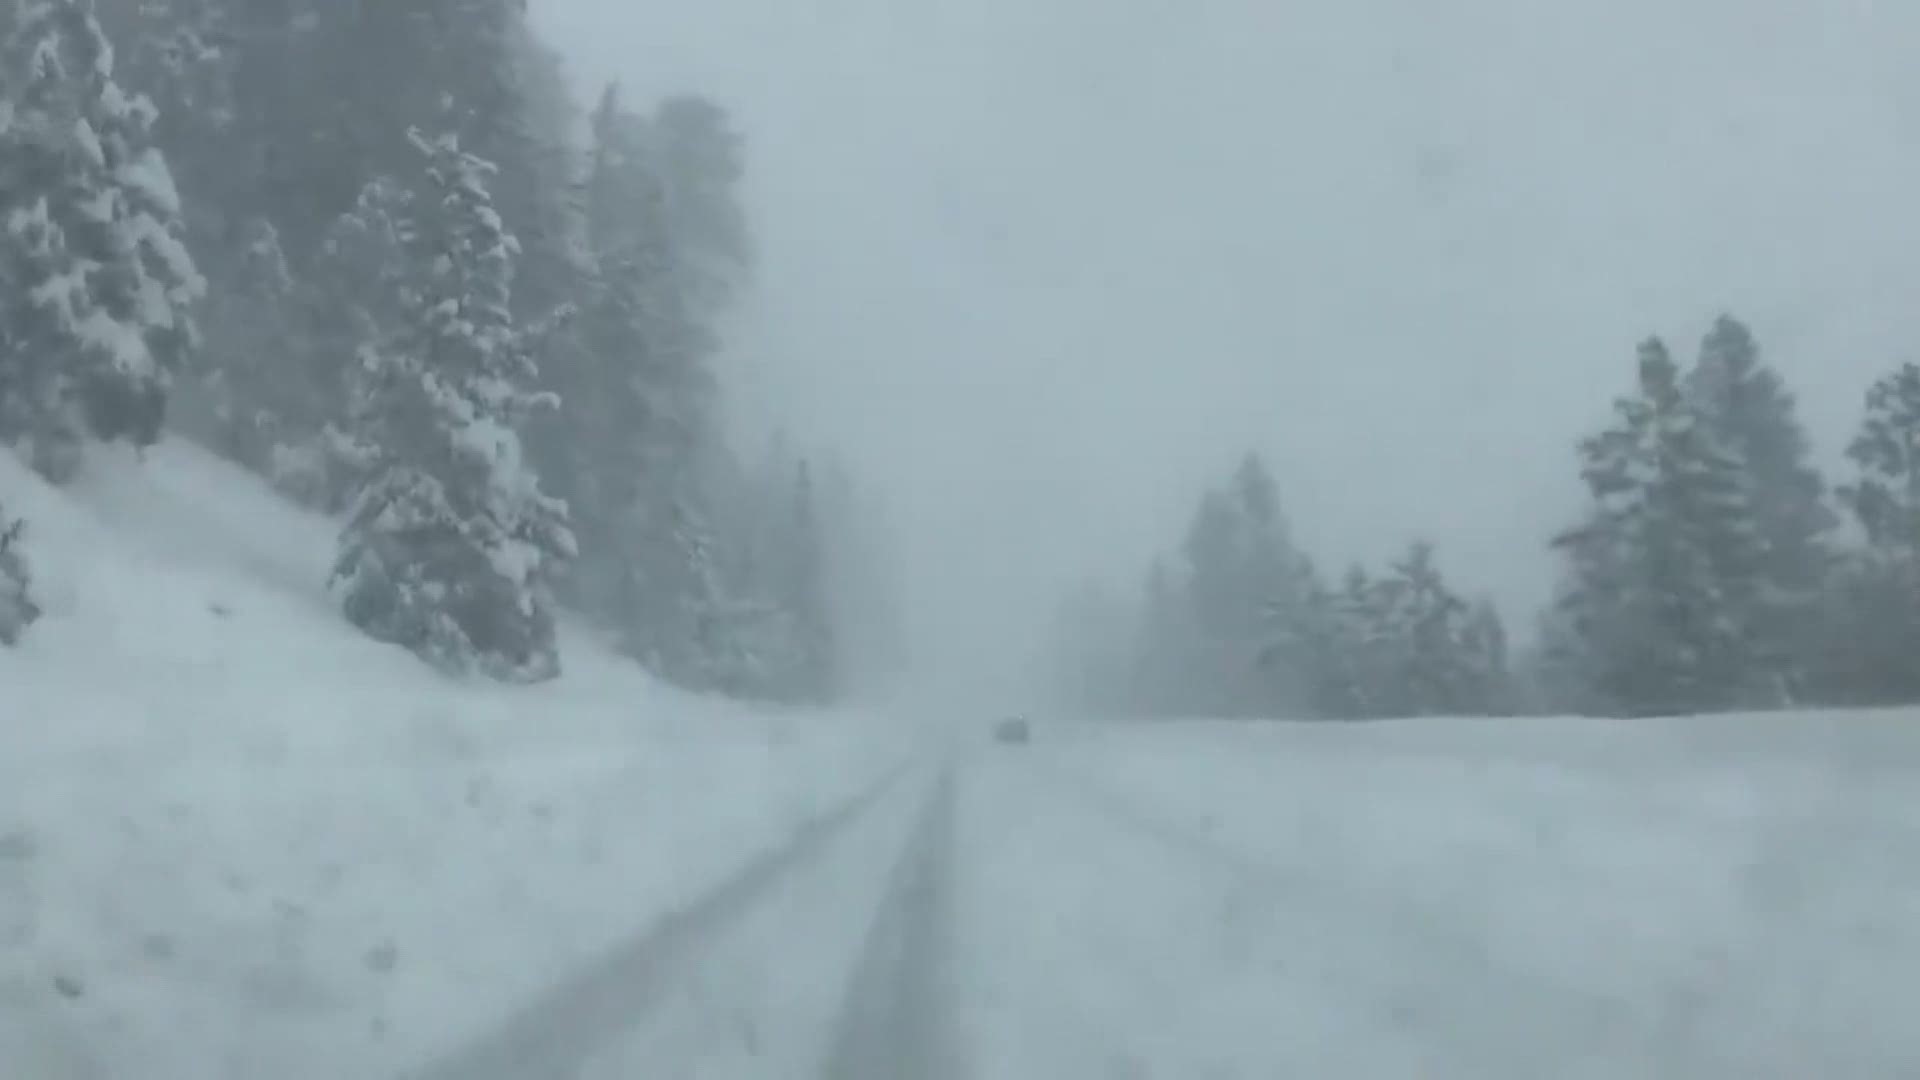 WOW! This is what ABC10's Daniela Pardo is driving through for coverage of winter conditions in the Sierra today. Visibility is low and roadways are icy.